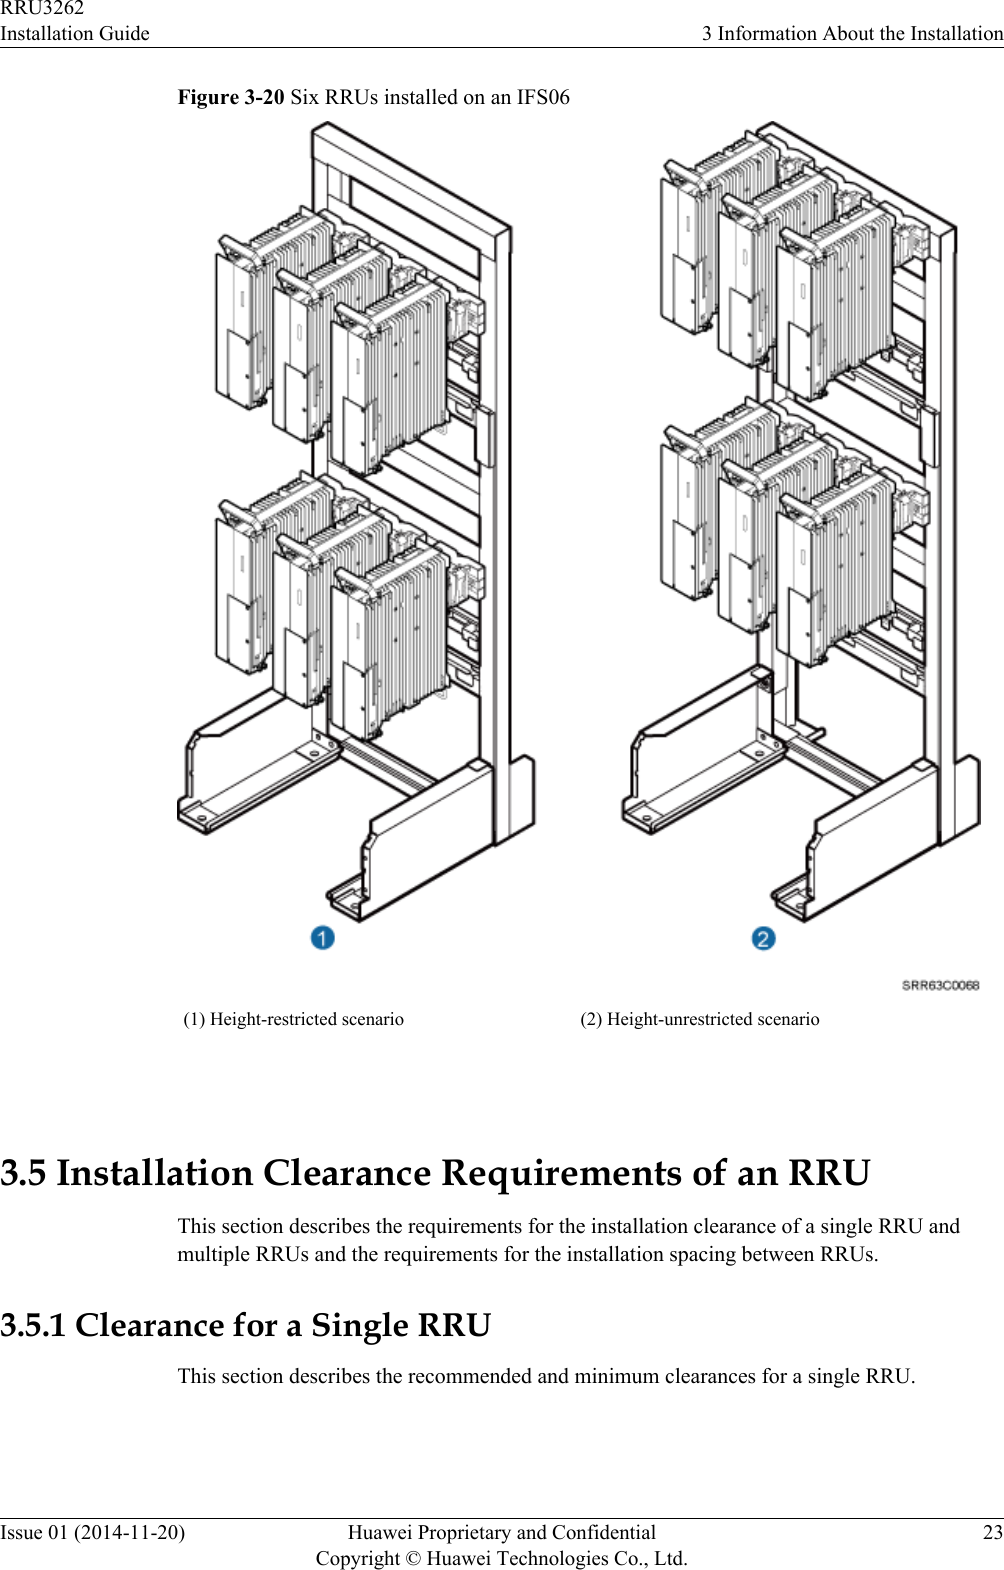 Figure 3-20 Six RRUs installed on an IFS06(1) Height-restricted scenario (2) Height-unrestricted scenario 3.5 Installation Clearance Requirements of an RRUThis section describes the requirements for the installation clearance of a single RRU andmultiple RRUs and the requirements for the installation spacing between RRUs.3.5.1 Clearance for a Single RRUThis section describes the recommended and minimum clearances for a single RRU.RRU3262Installation Guide 3 Information About the InstallationIssue 01 (2014-11-20) Huawei Proprietary and ConfidentialCopyright © Huawei Technologies Co., Ltd.23